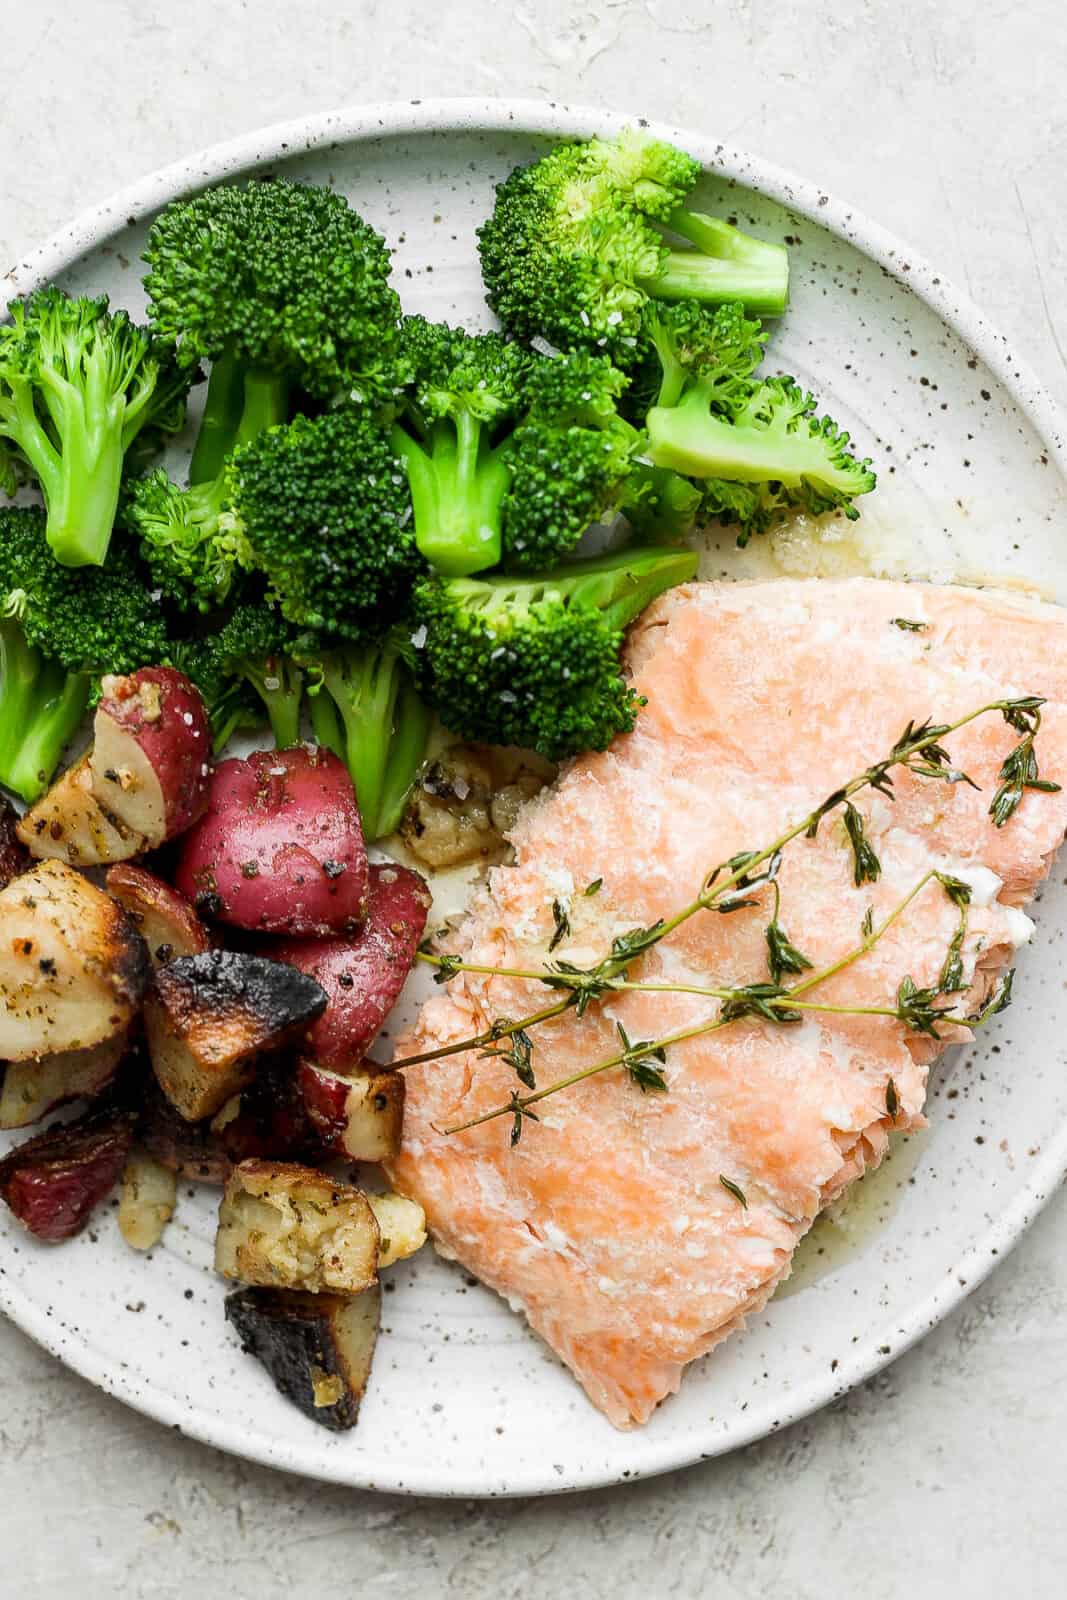 Baked salmon on a plate with potatoes and broccoli.